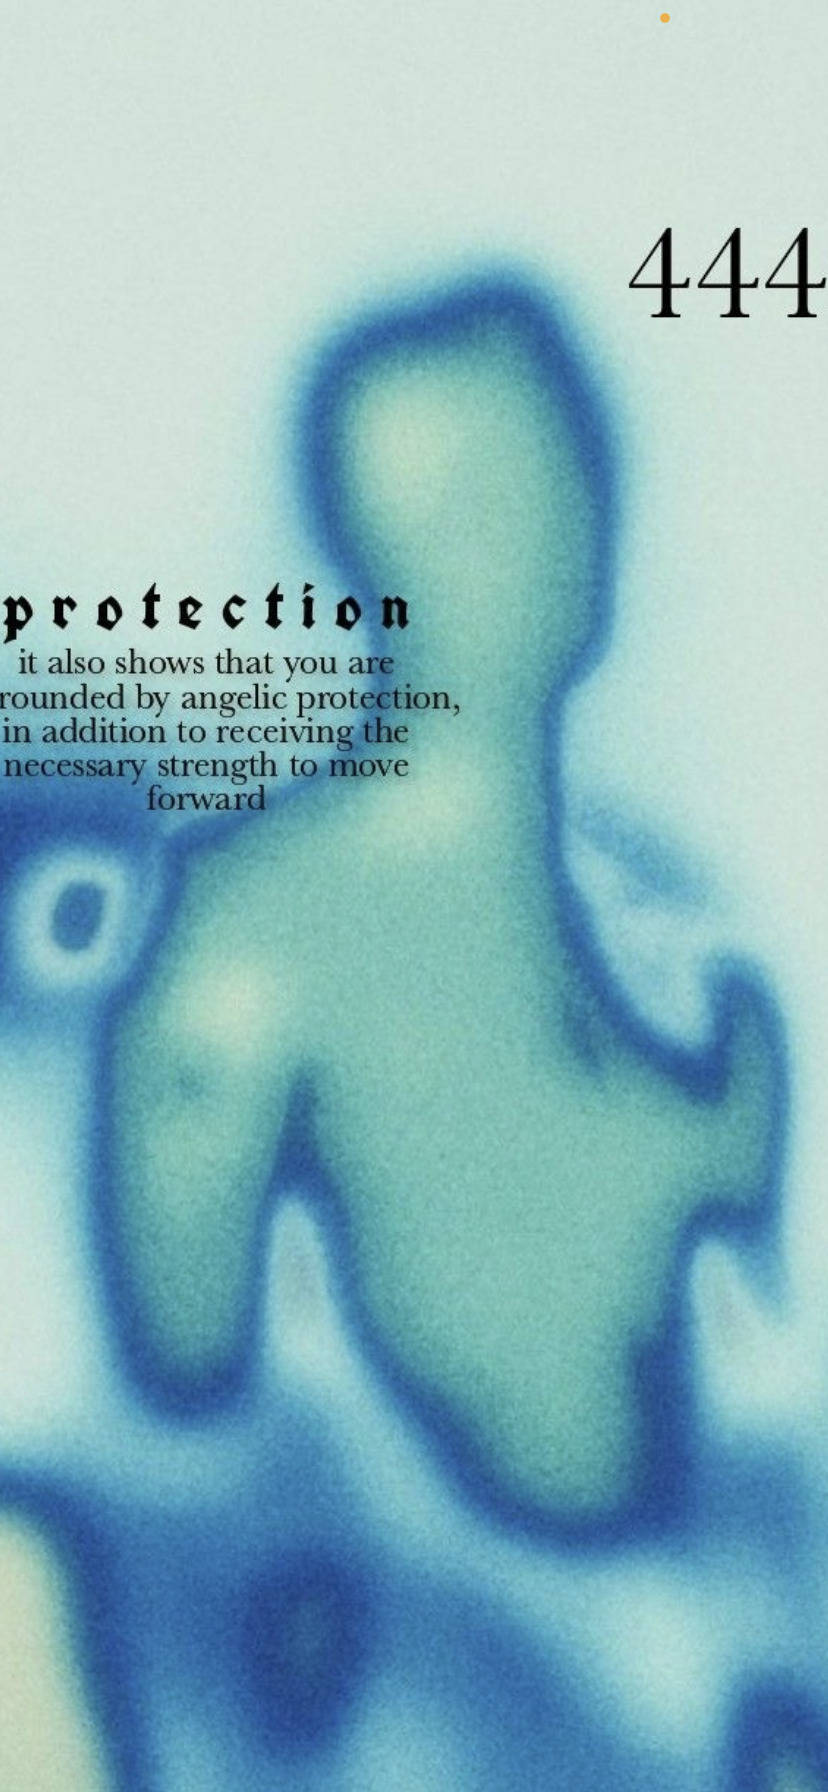 444 Protection Aura Aesthetic Picture